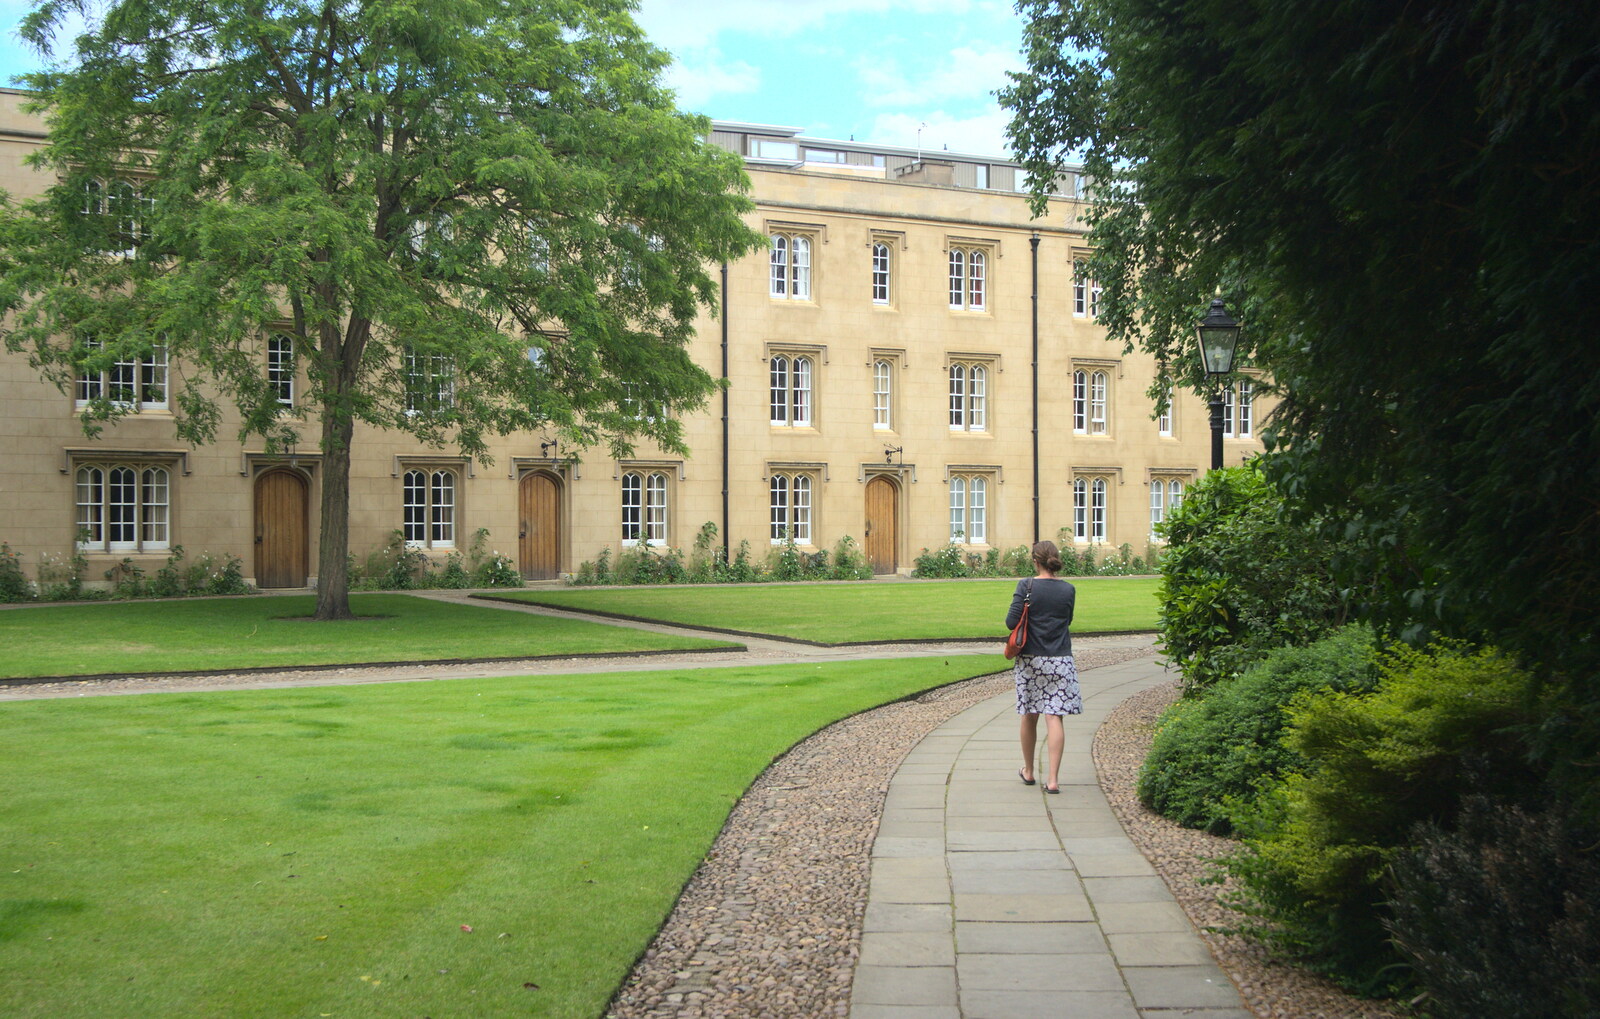 We head off through Christ's Second Court from Back in the 'Bridge: an Anniversary, Cambridge - 3rd July 2016